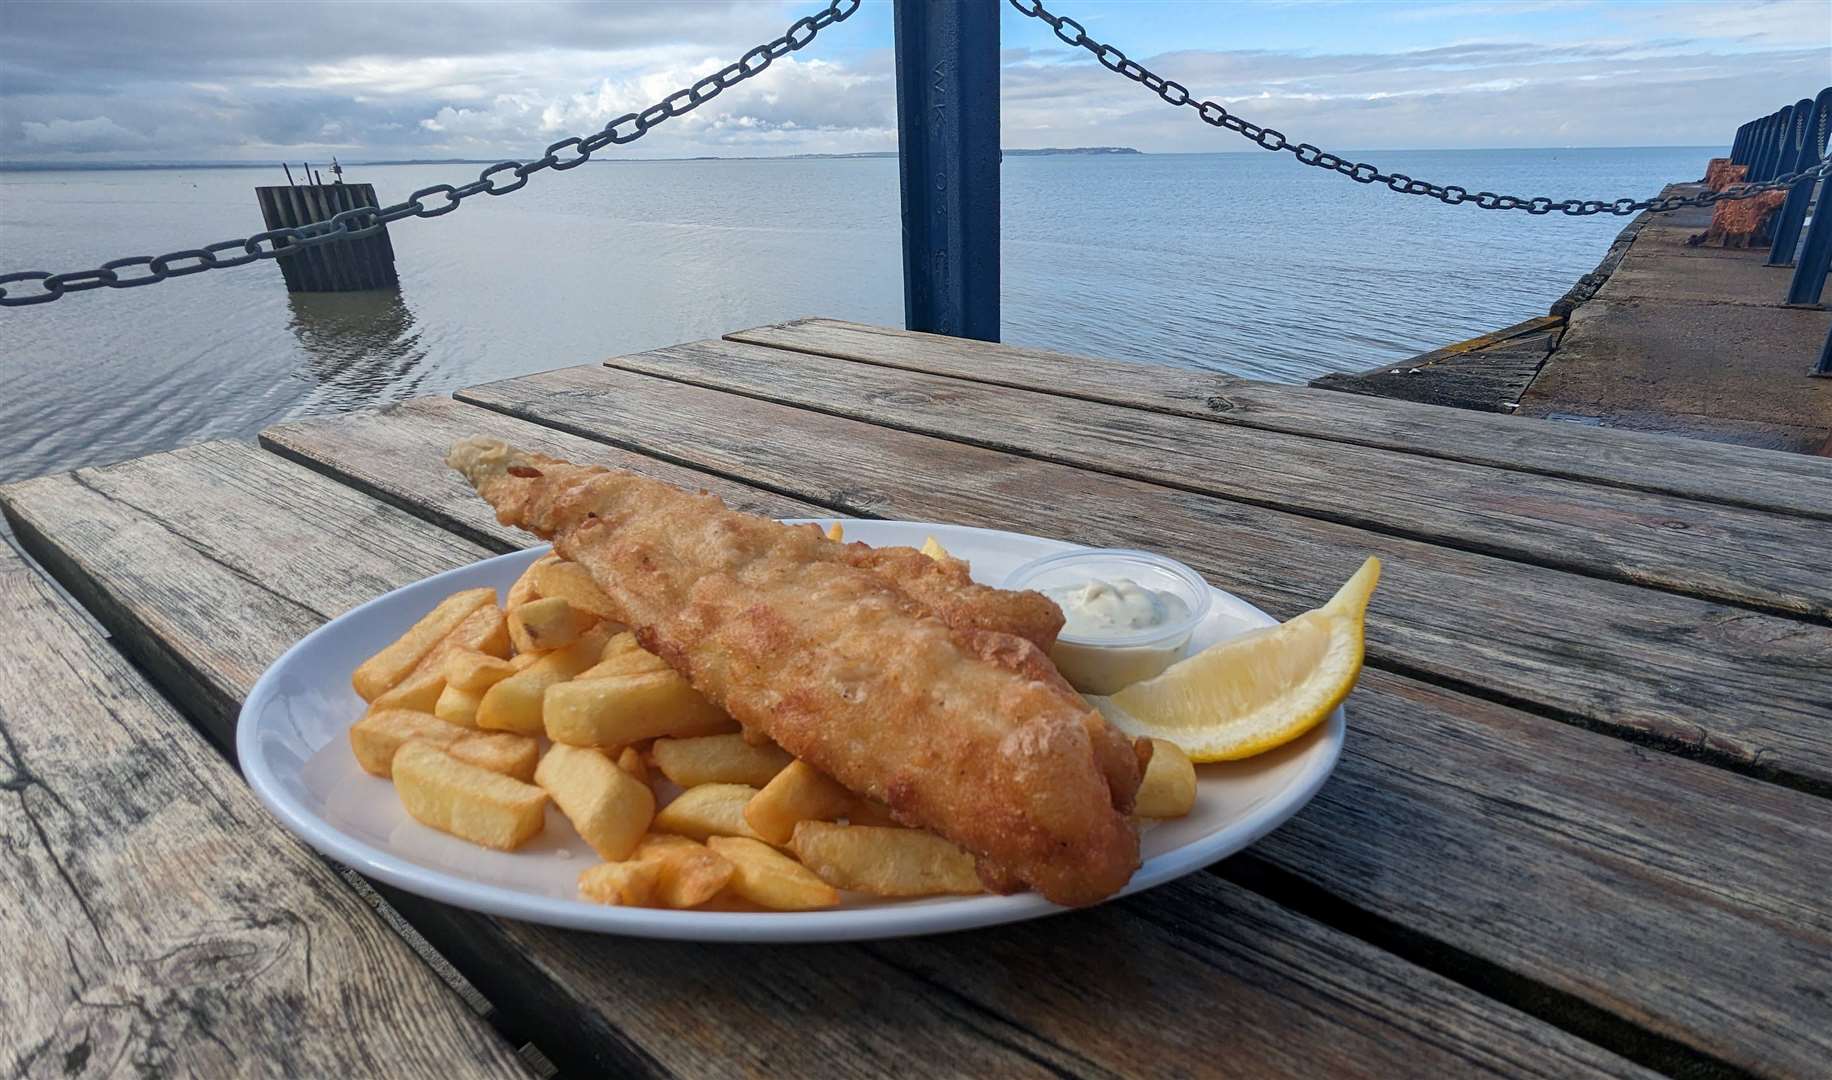 Nothing beats fish and chips by the sea